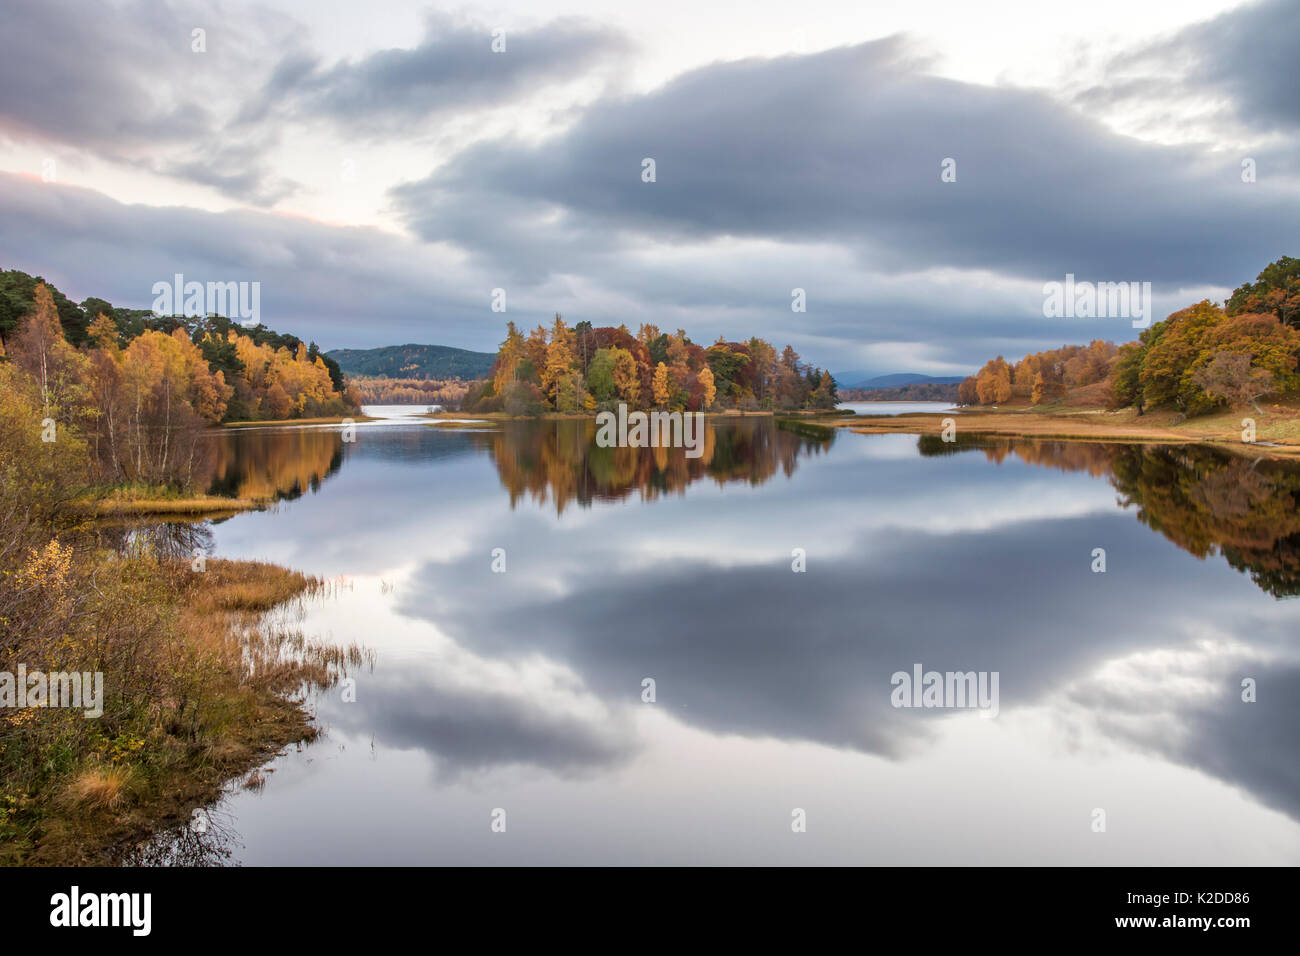 Autumn colours and stormy clouds reflected in the calm waters of Loch Insh, Cairngorms National Park, Scotland, UK, November 2015. Stock Photo